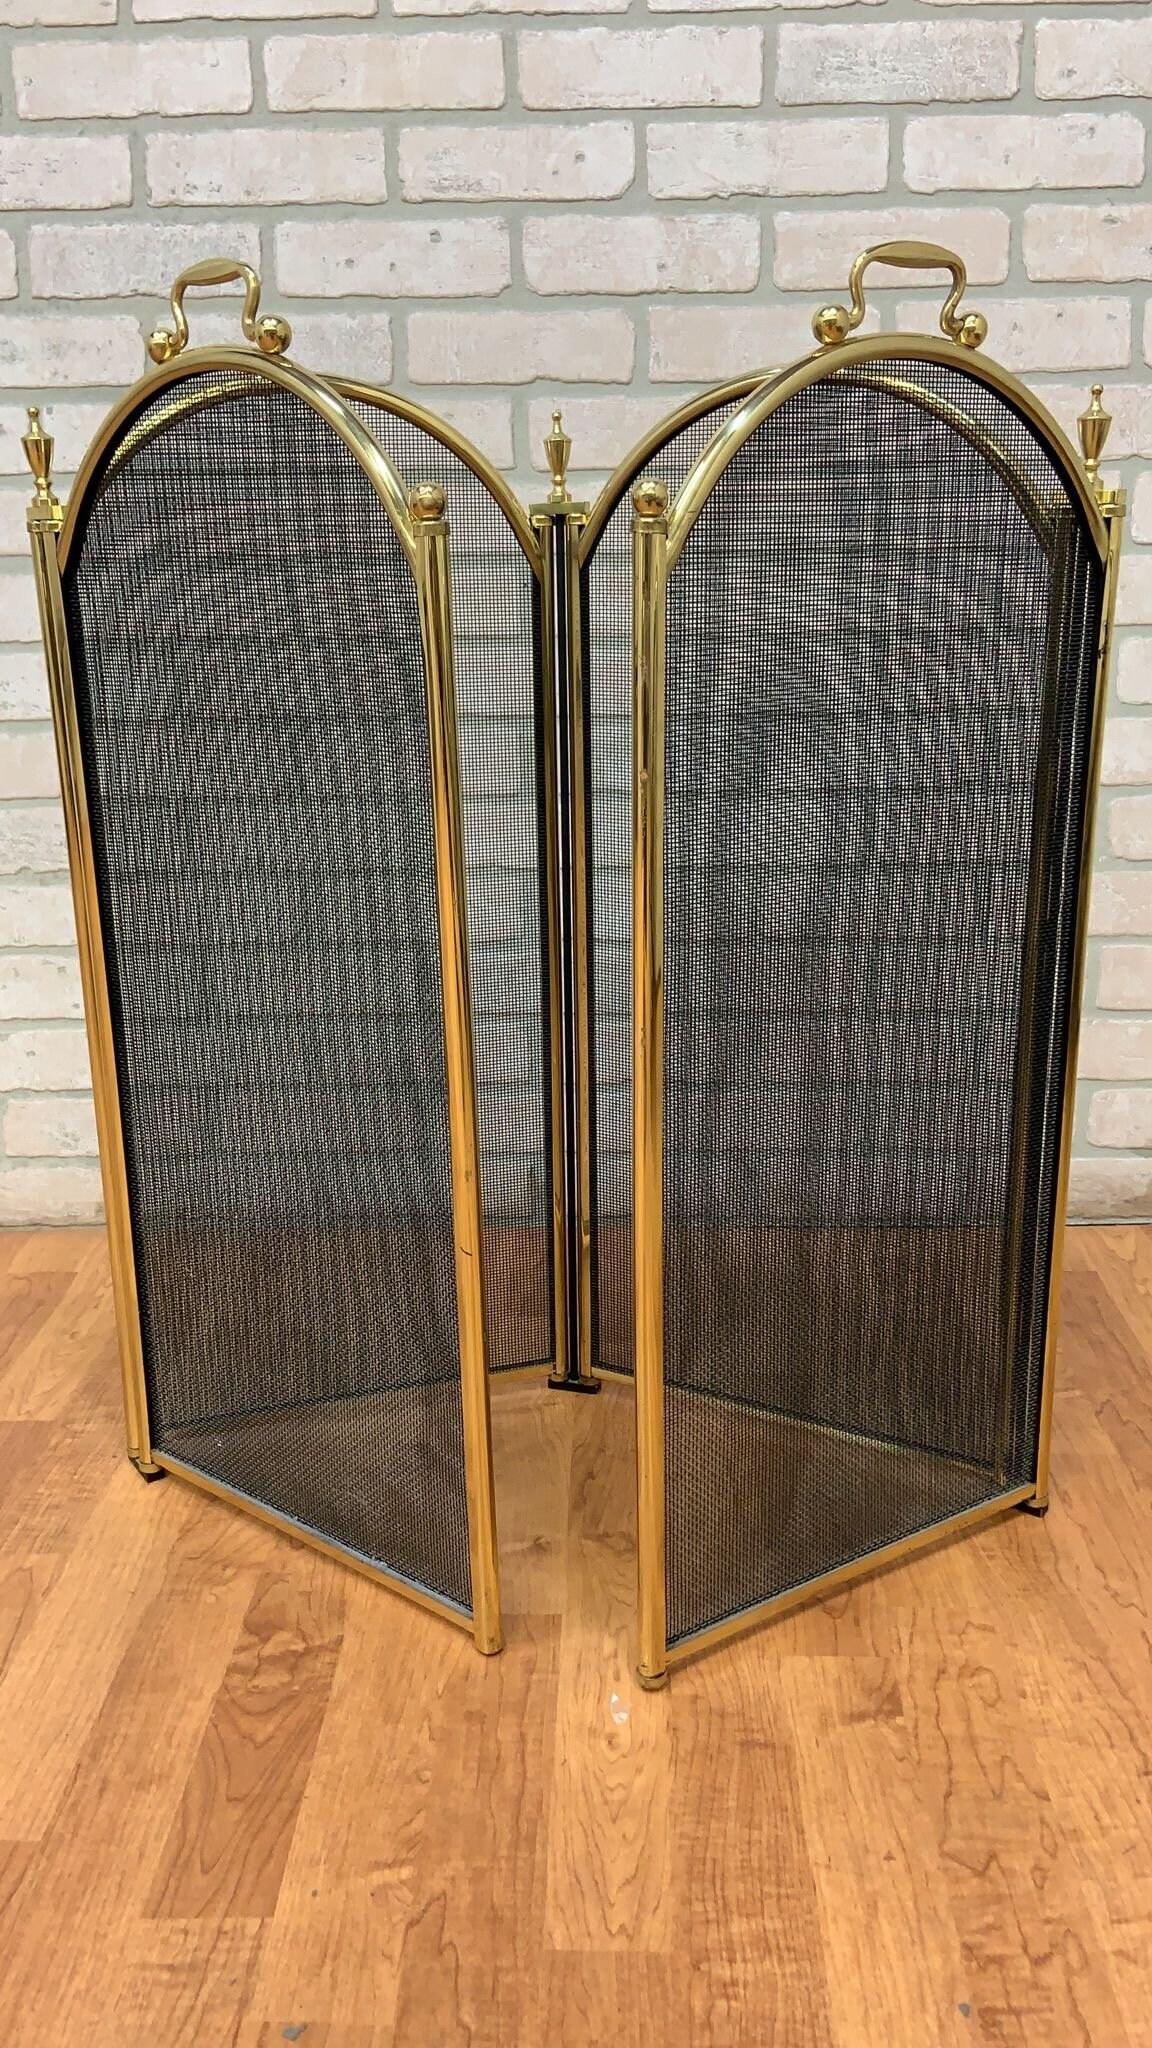 20th Century Vintage Mid Century Mesh with Brass Ball Handles & Finials Folding Hearth Screen For Sale